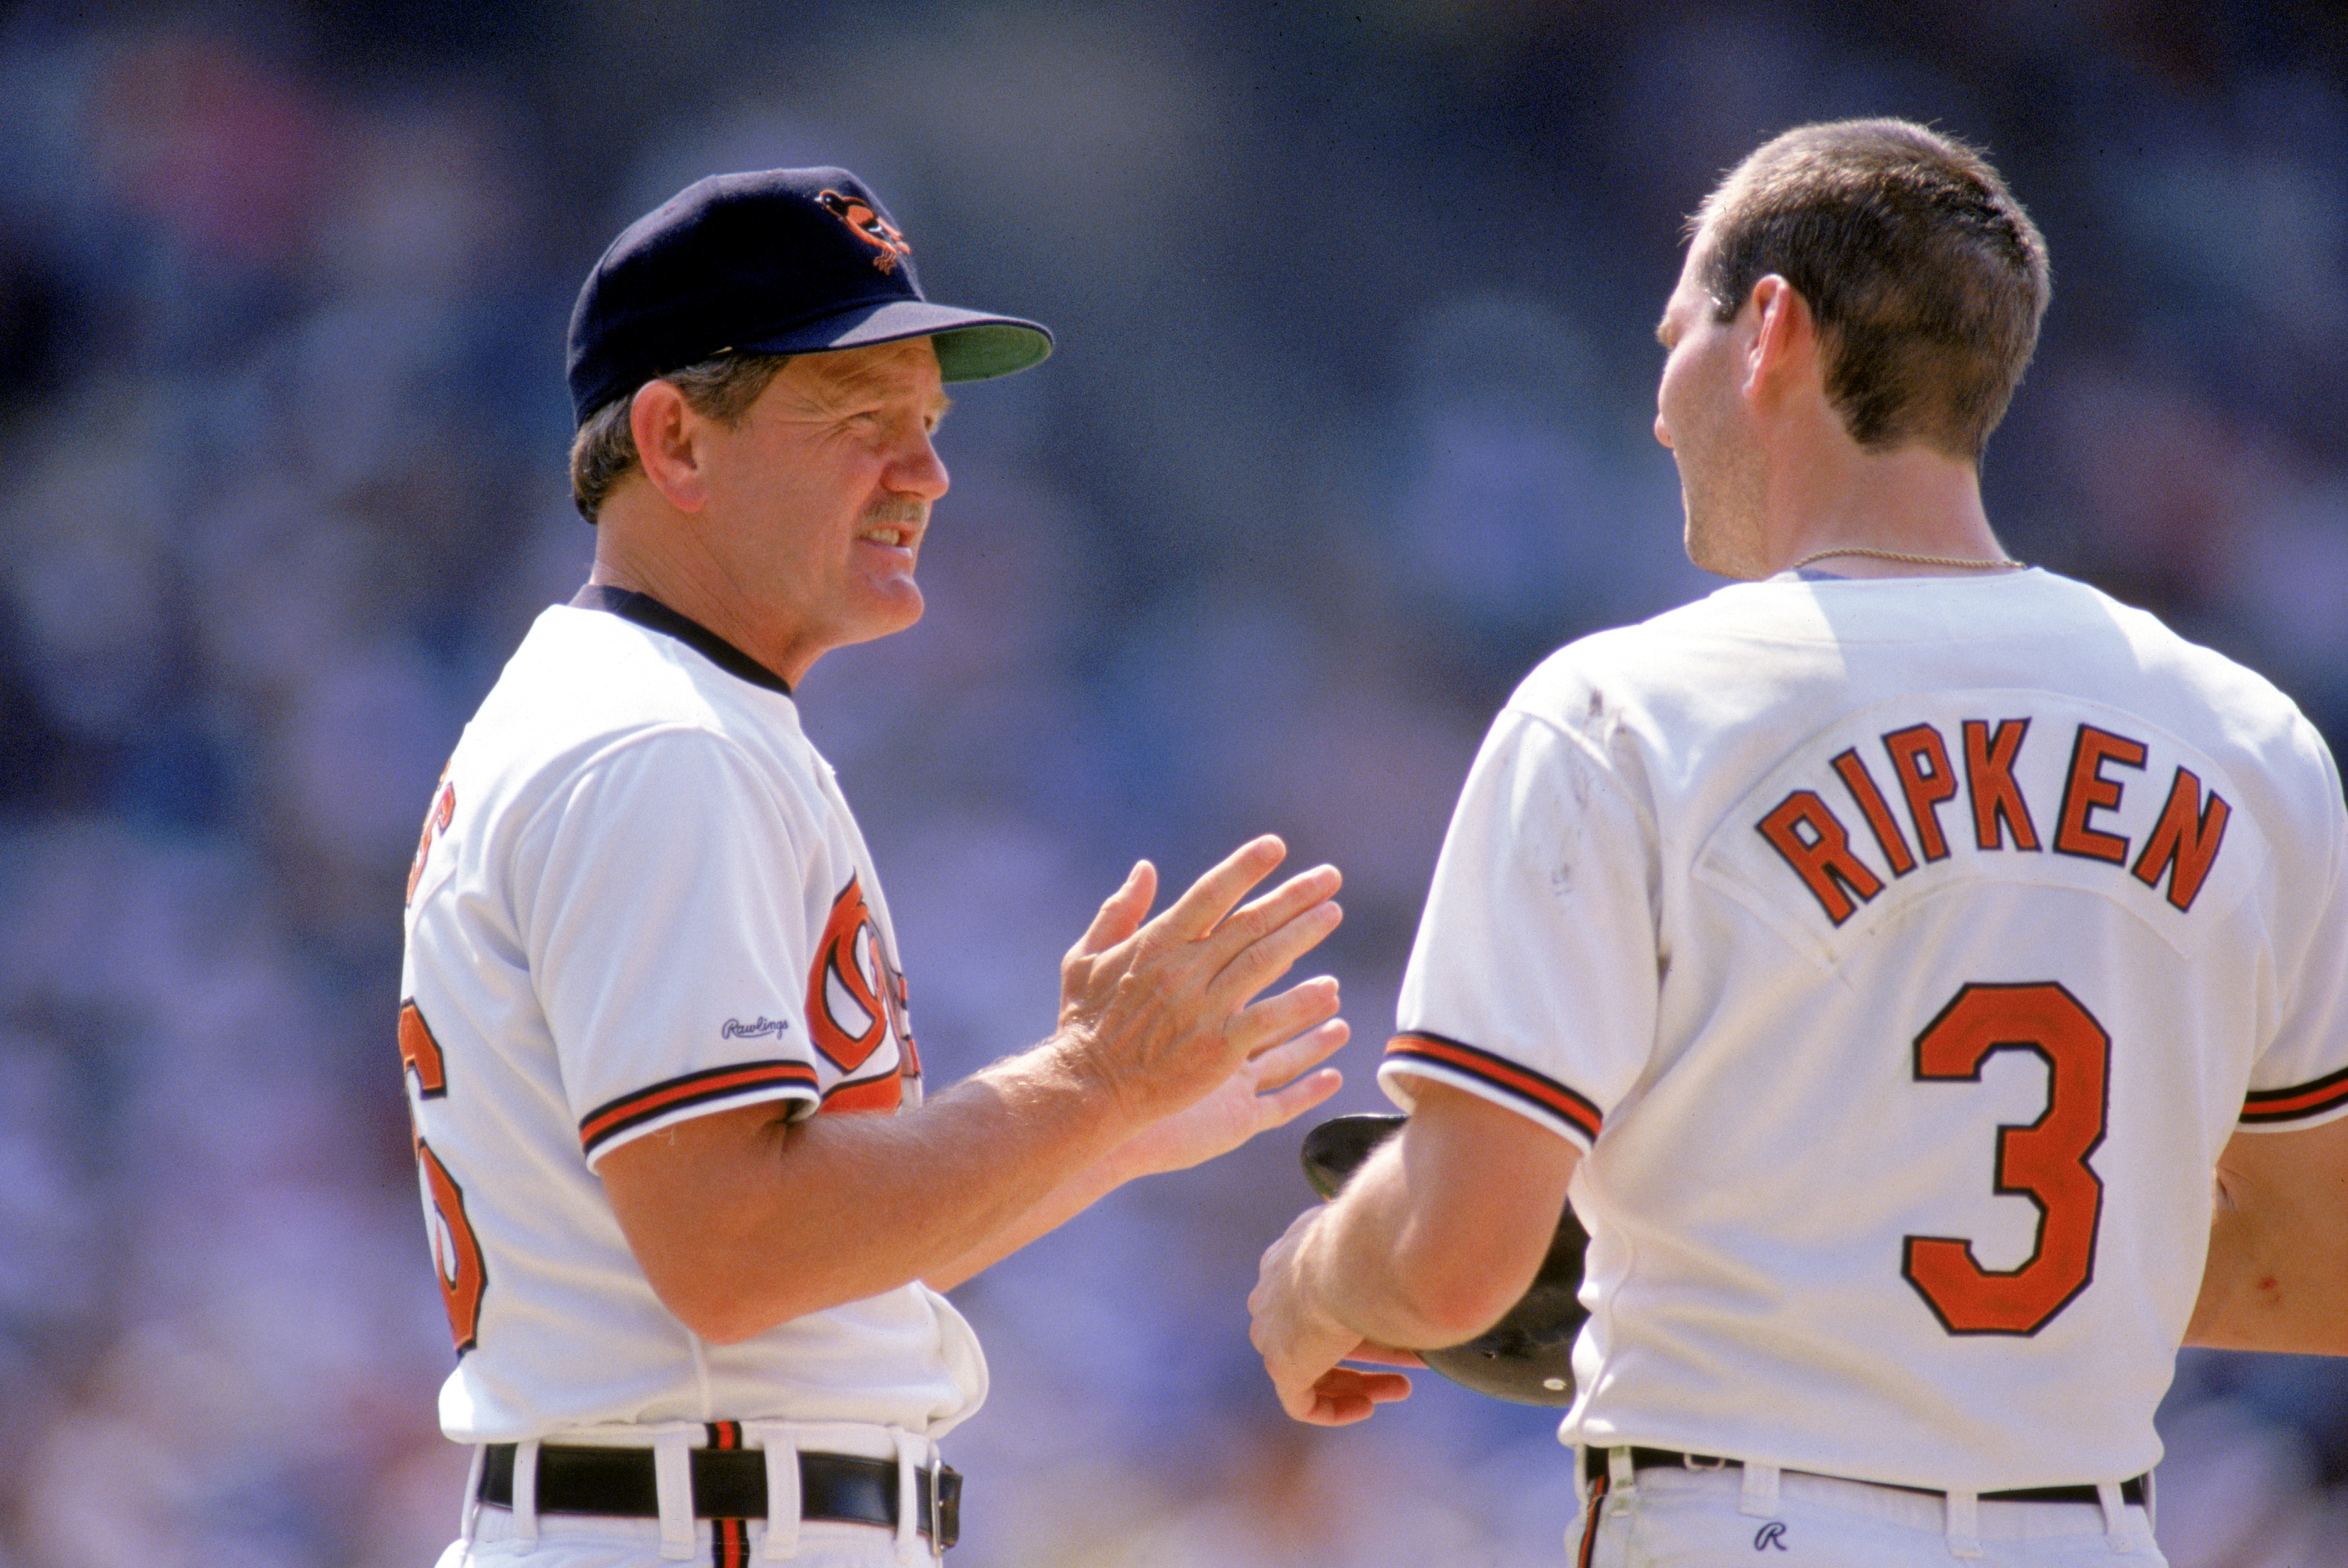 1990:  Coach Johnny Oates of the Baltimore Orioles talks to pitcher Billy Ripken #3 during a game in the 1990 season. (Photo by: Rick Stewart/Getty Images)